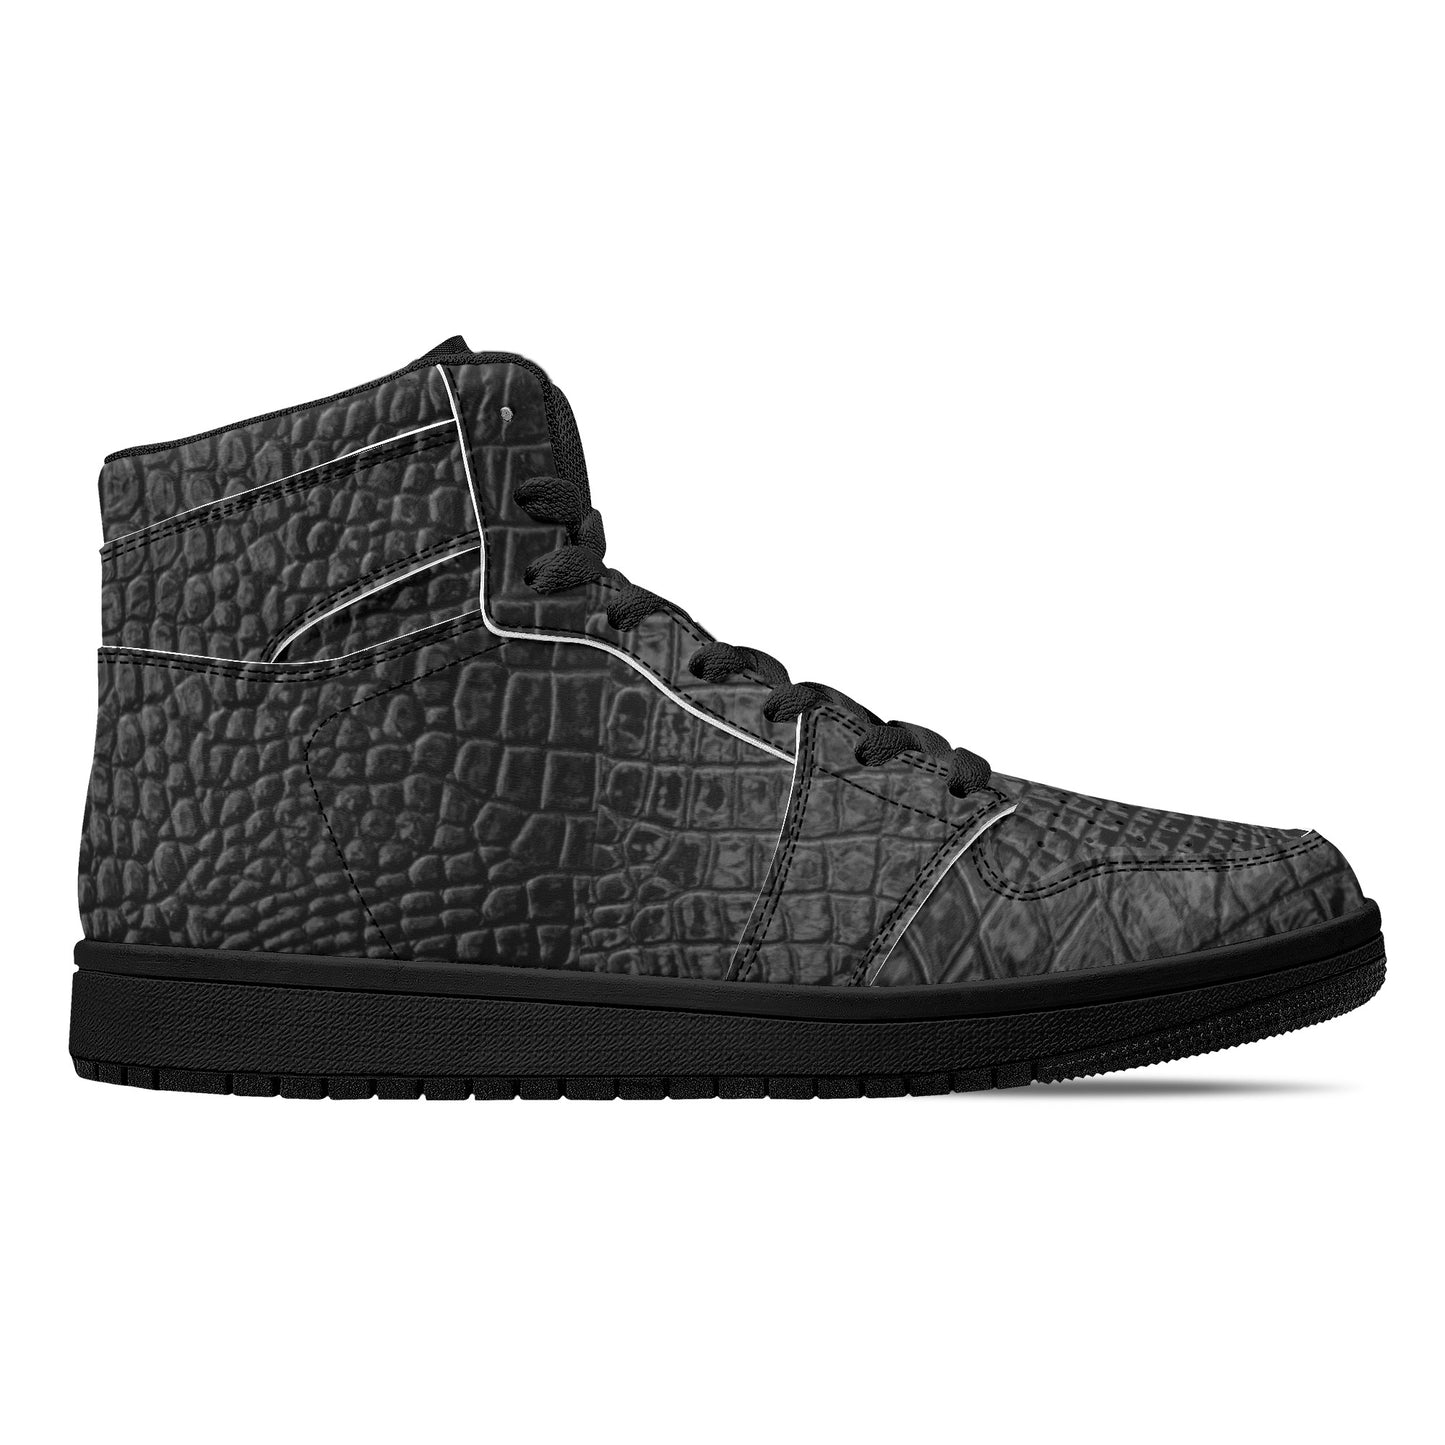 Men's High Top Leather